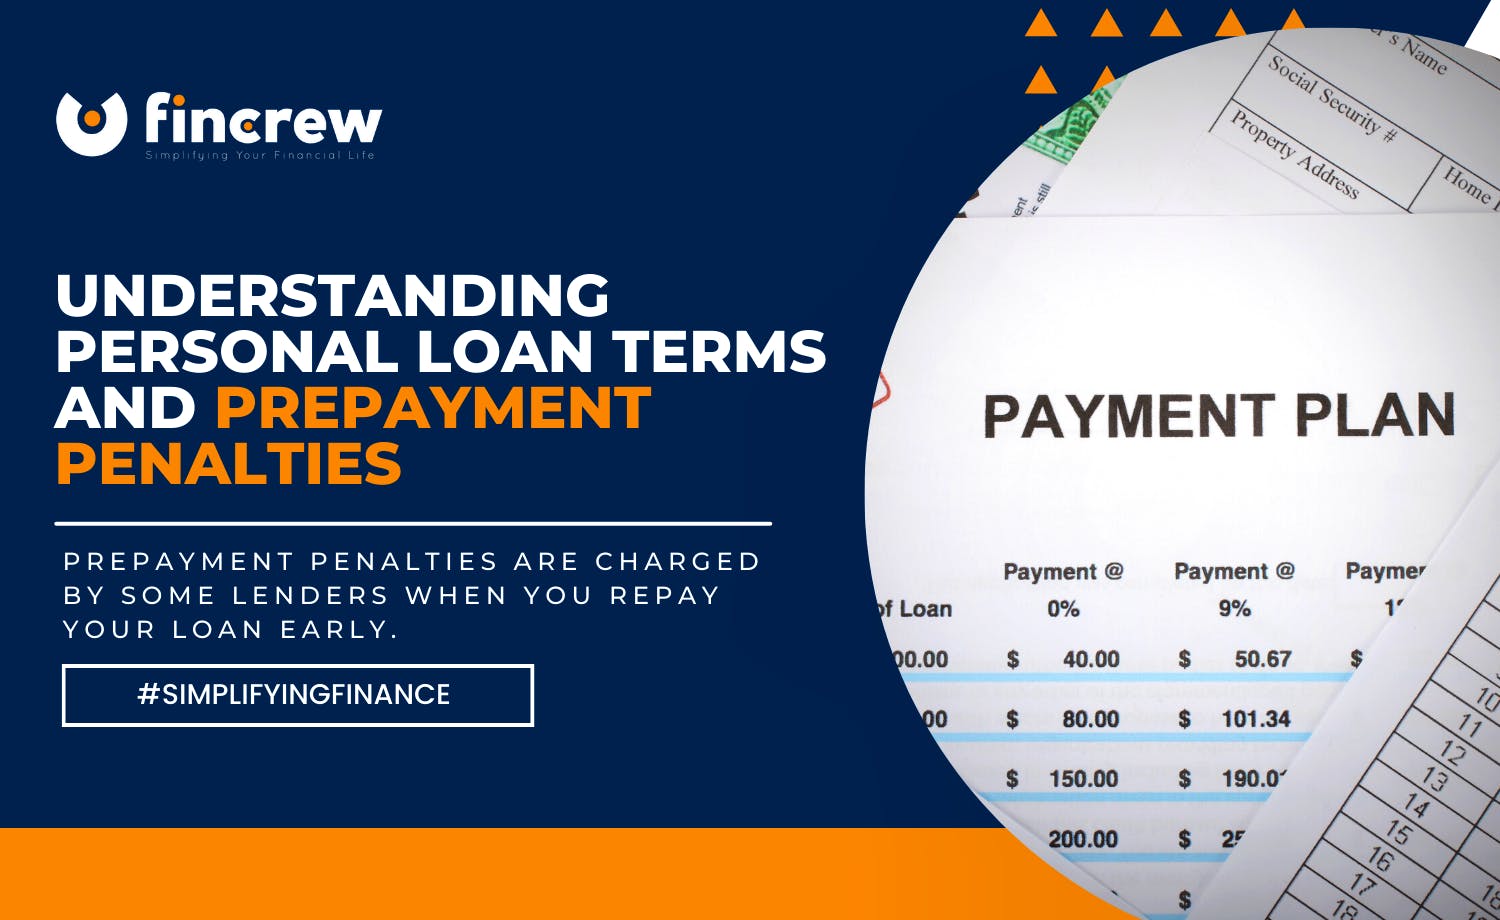 Personal Loan Terms And Prepayment Penalties